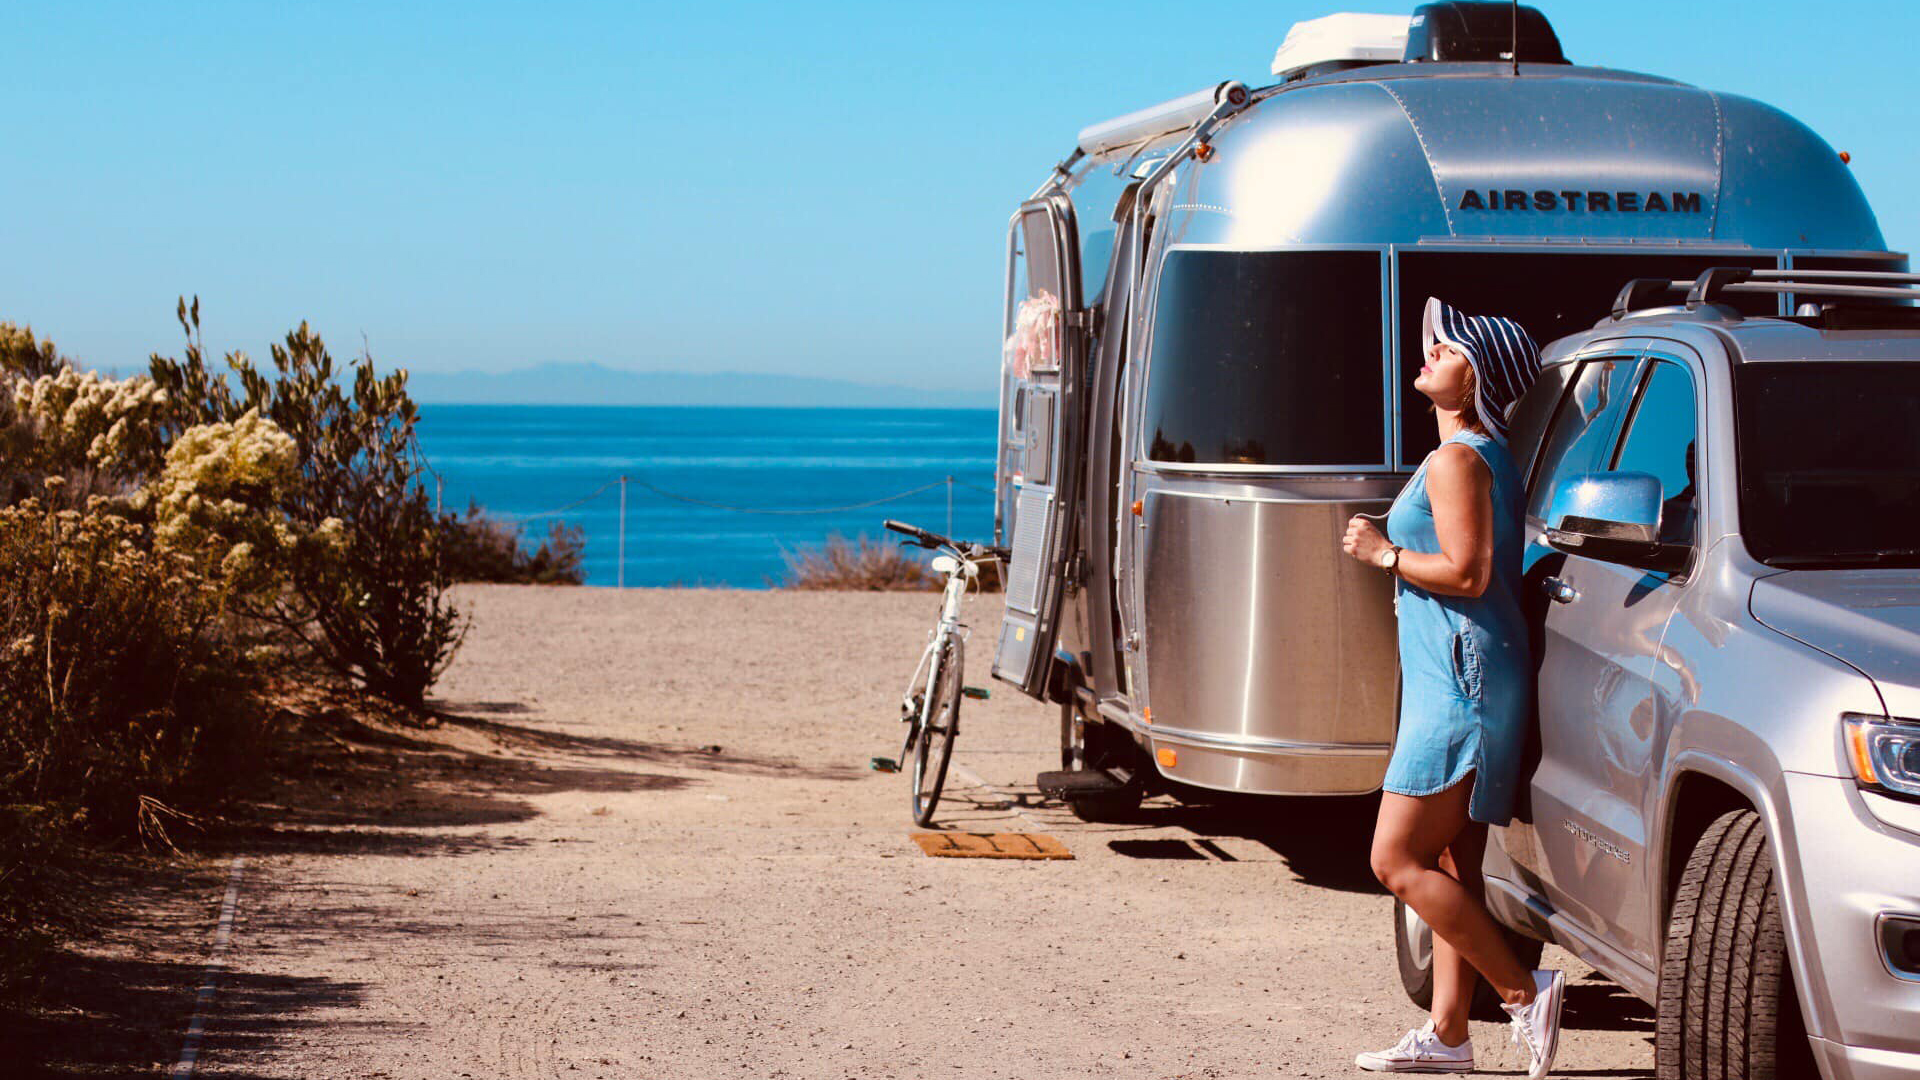 Jaci standing with Airstream on the beach